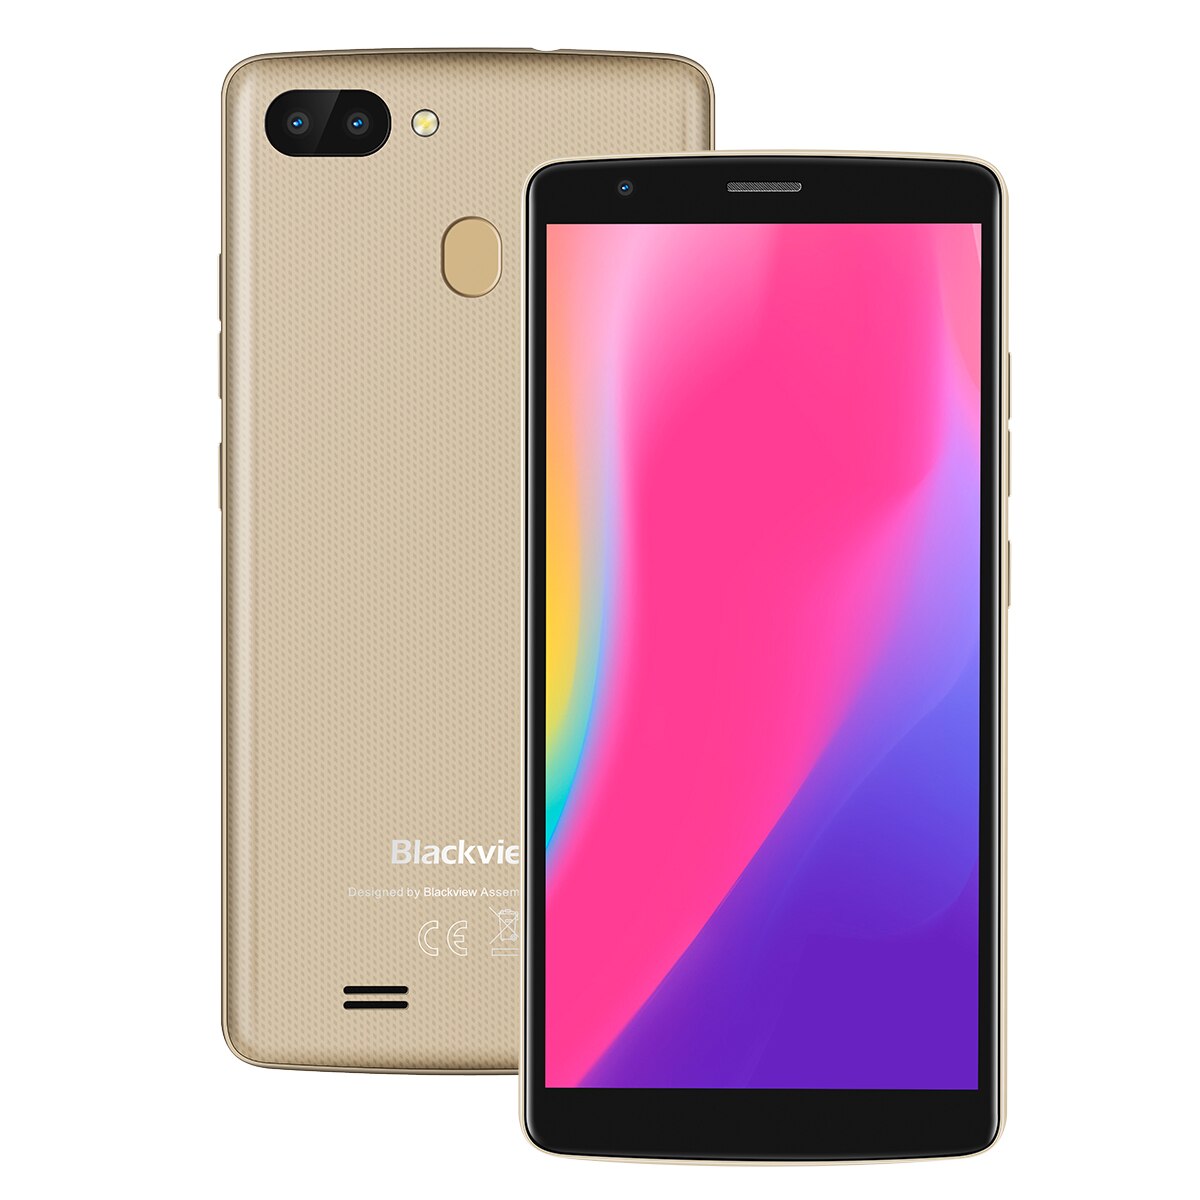 Blackview A20 Pro Smartphone 2GB+16GB MT6739WAL Quad Core Android 8.1 5.5inch 18:9 Full Screen Fingerprint 4G Mobile Phone